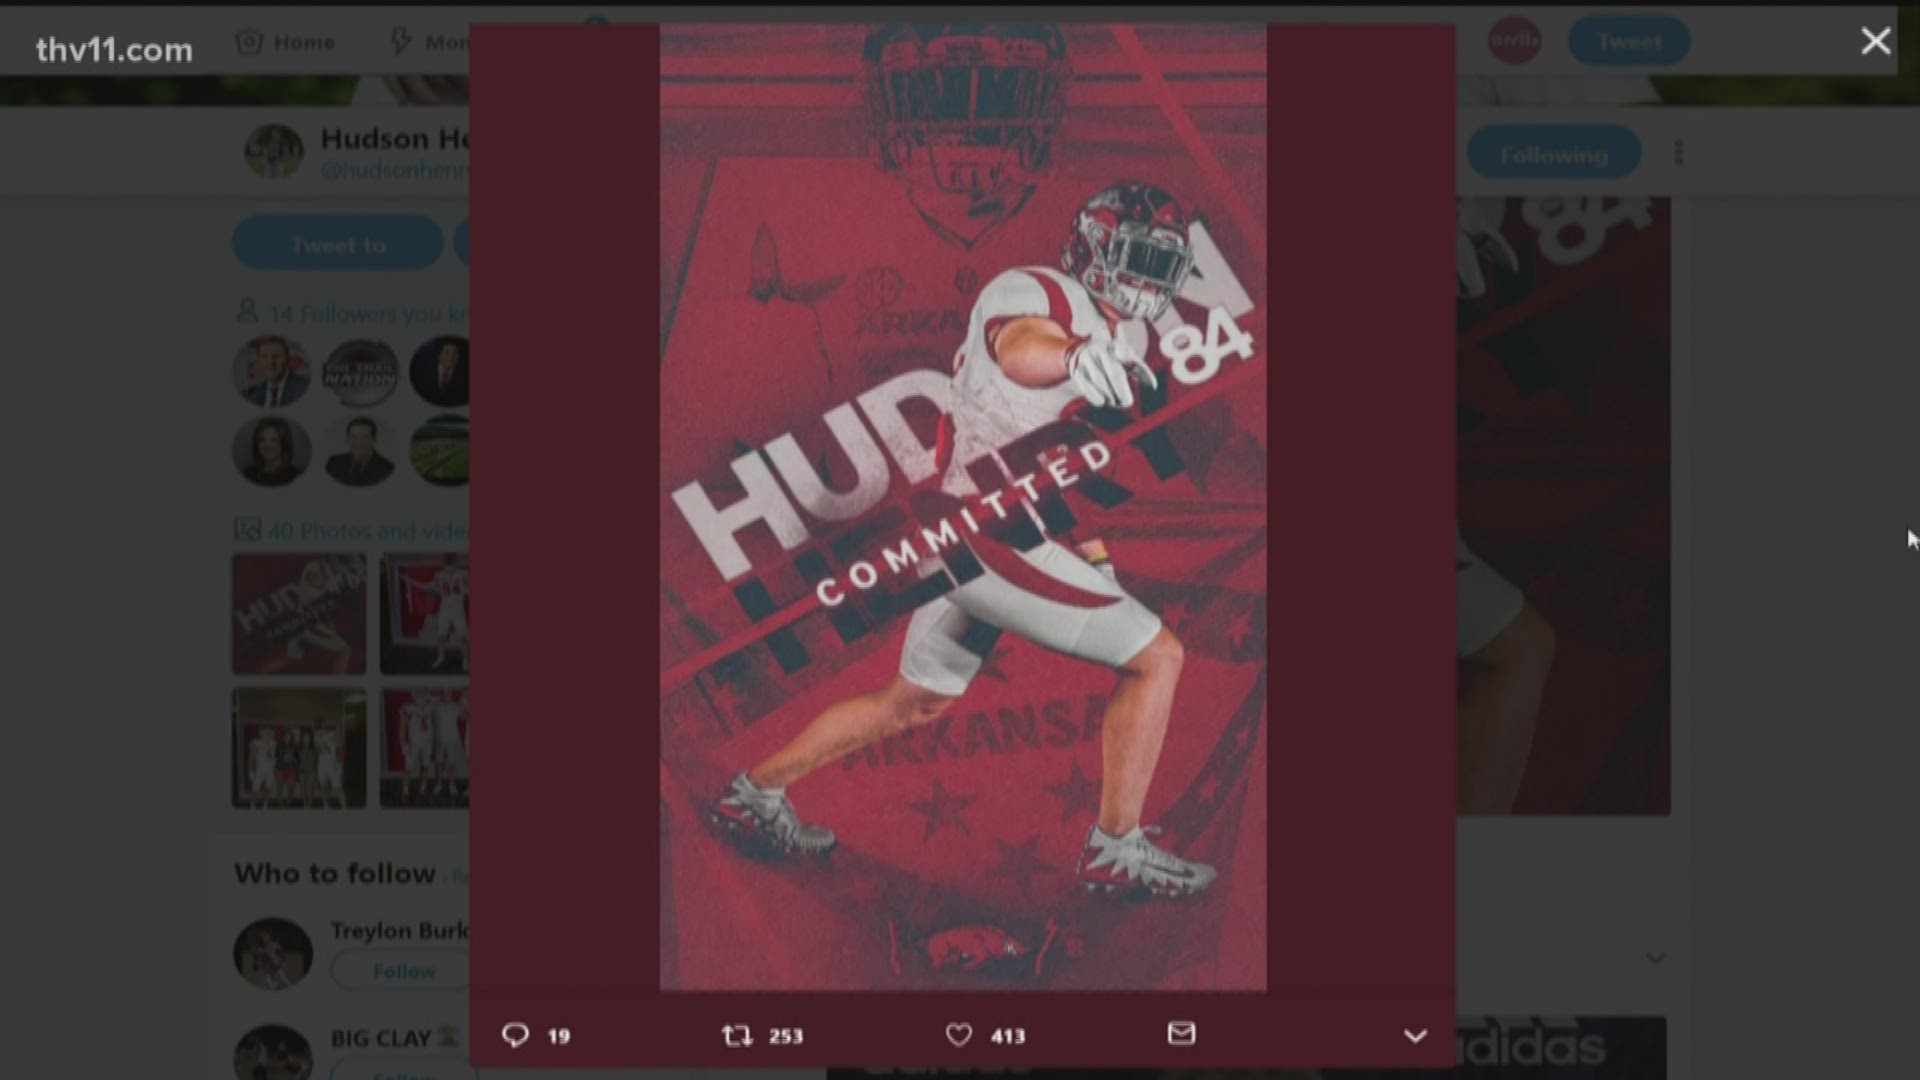 PULASKI ACADEMY TIGHT END HUDSON HENRY MADE IT OFFICIAL HE IS COMMITTED TO THE ARKANSAS RAZORBACKS.